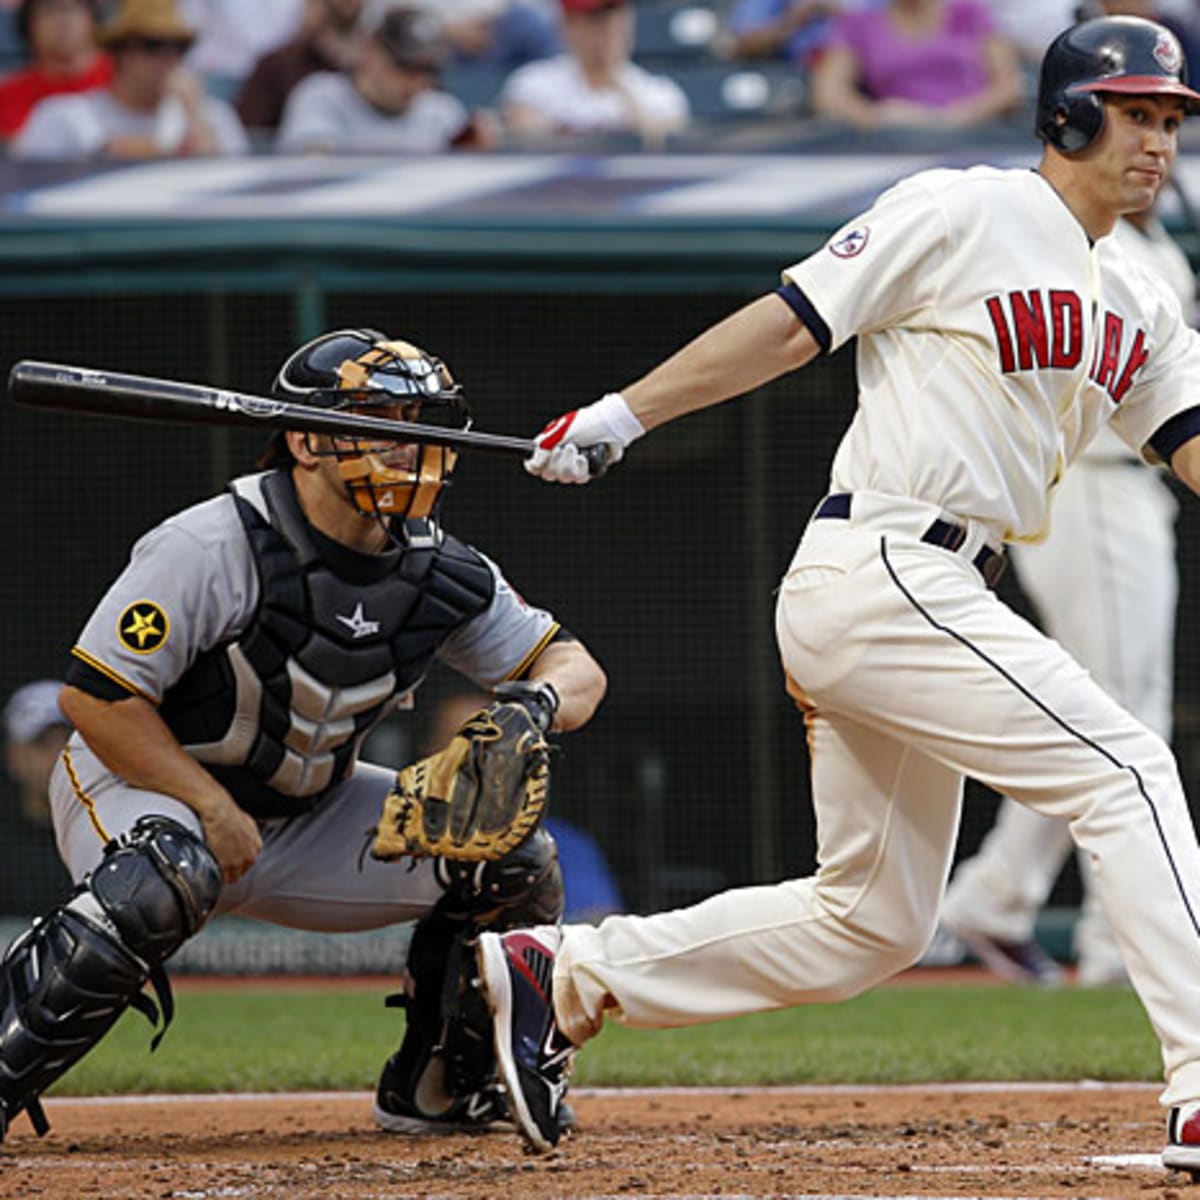 Reds have talked to Grady Sizemore about possible comeback